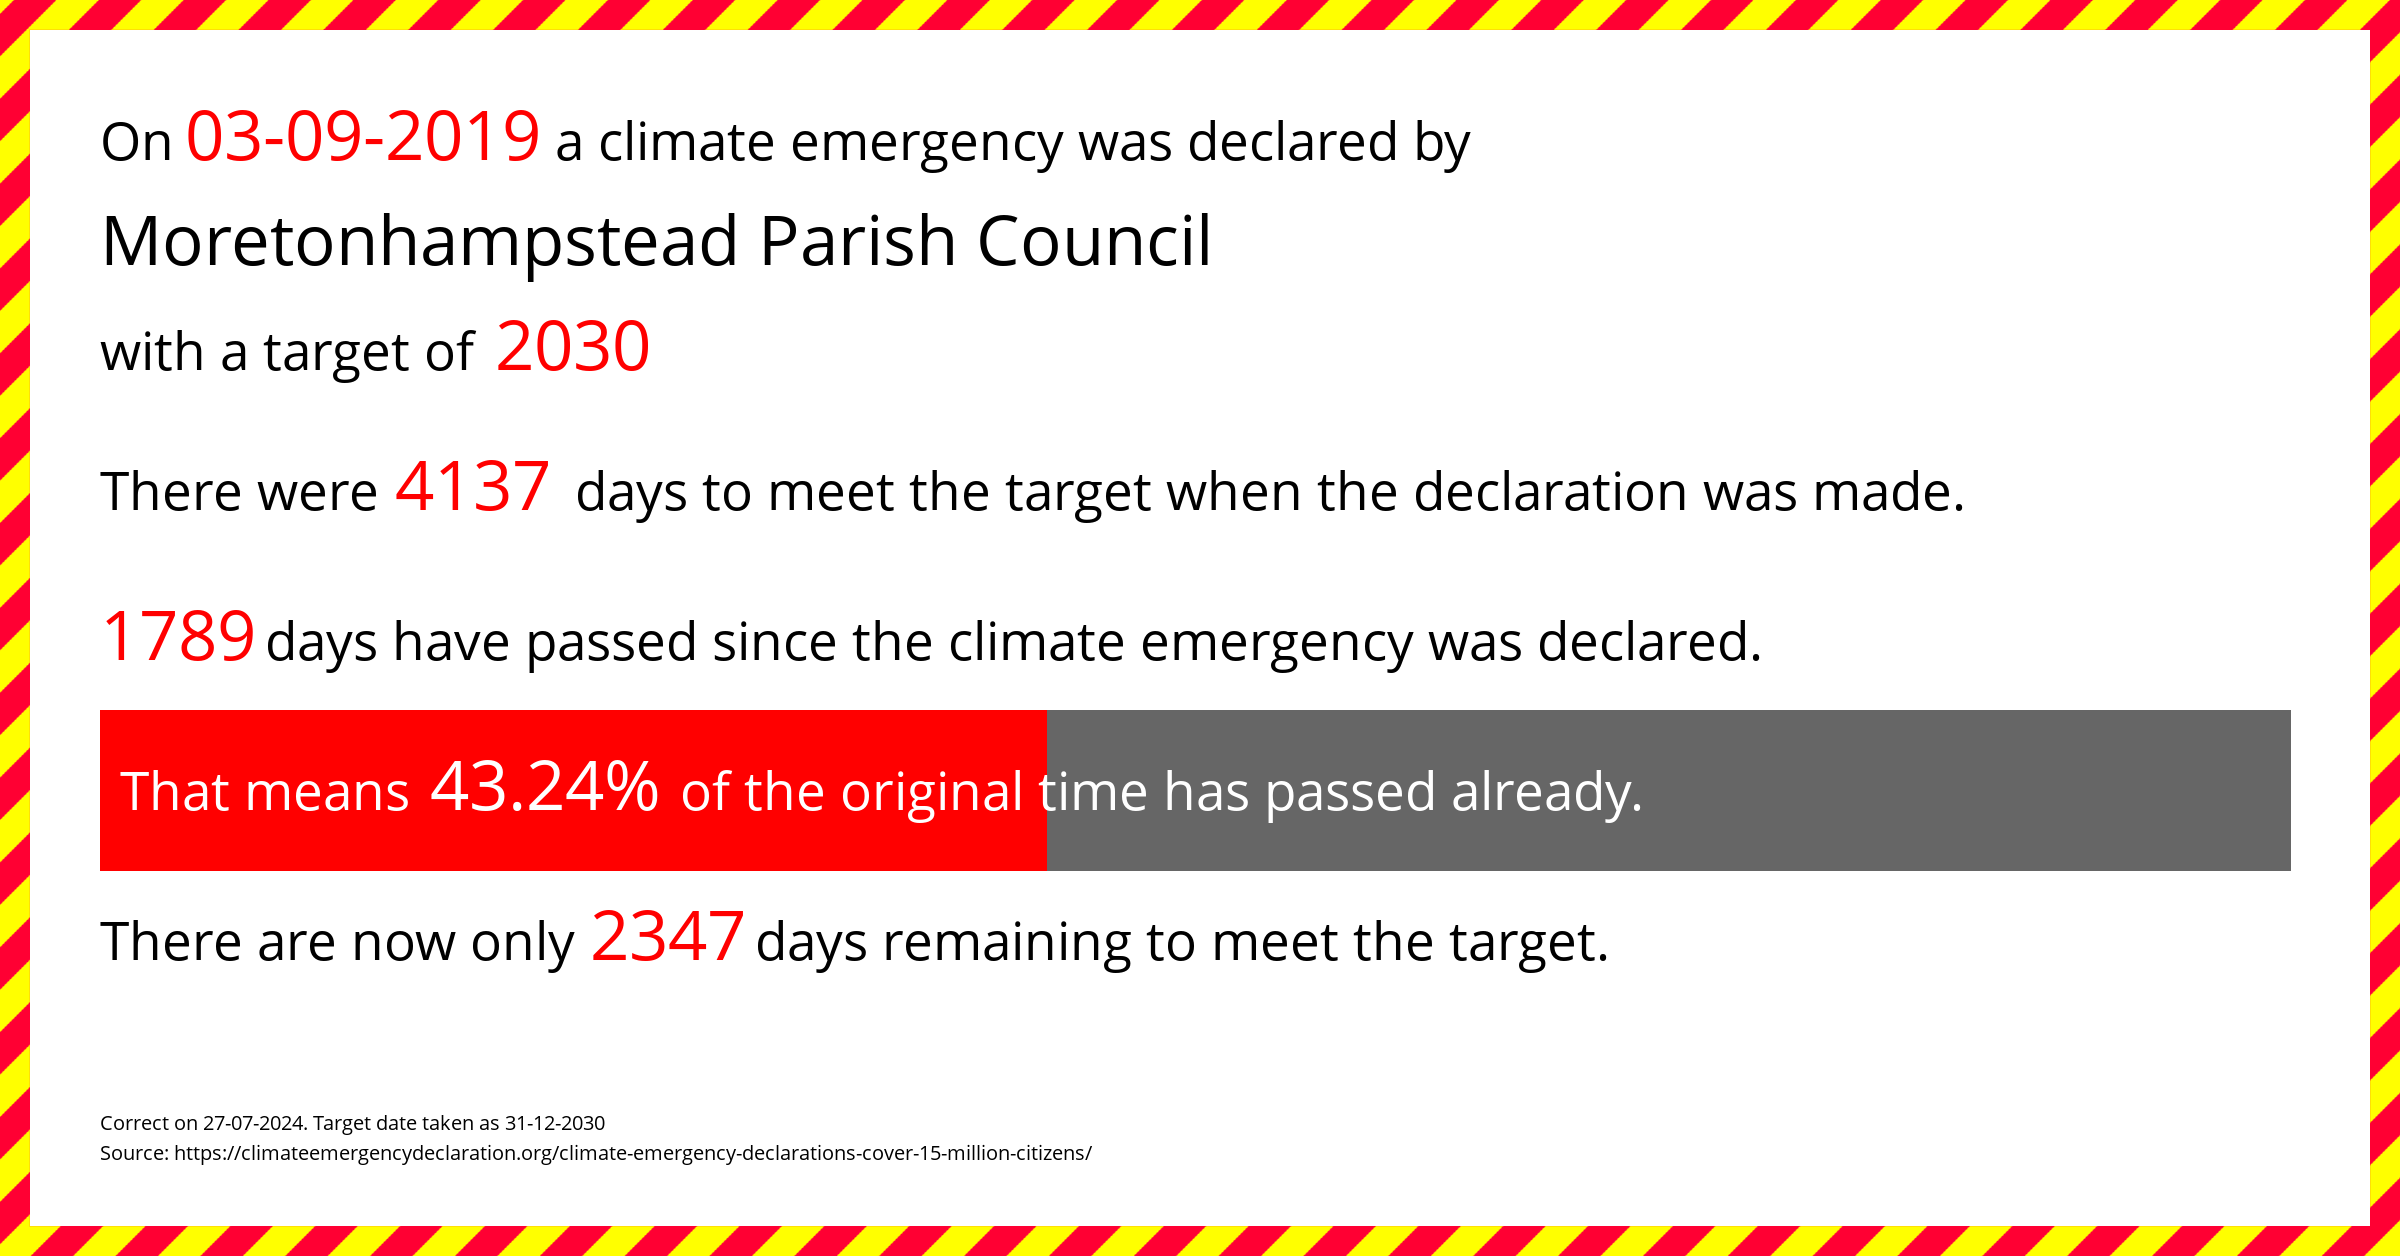 Moretonhampstead Parish Council declared a Climate emergency on Tuesday 3rd September 2019, with a target of 2030.